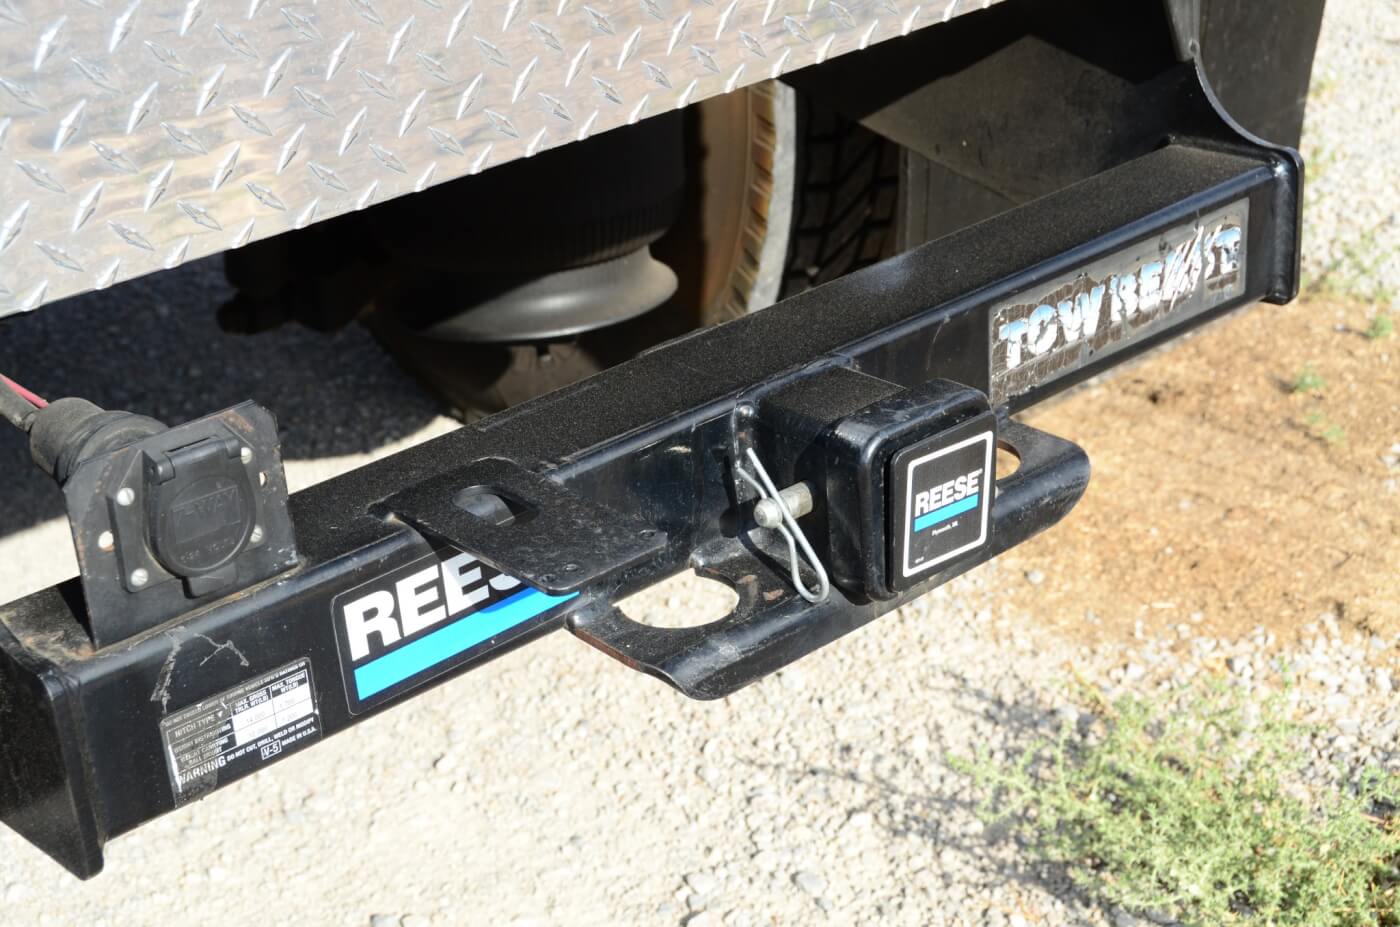 The Reese Class 5 hitch is awesome for towing a 25-foot travel trailer or 16-foot car trailer carrying a Jeep CJ-7 rock crawler.